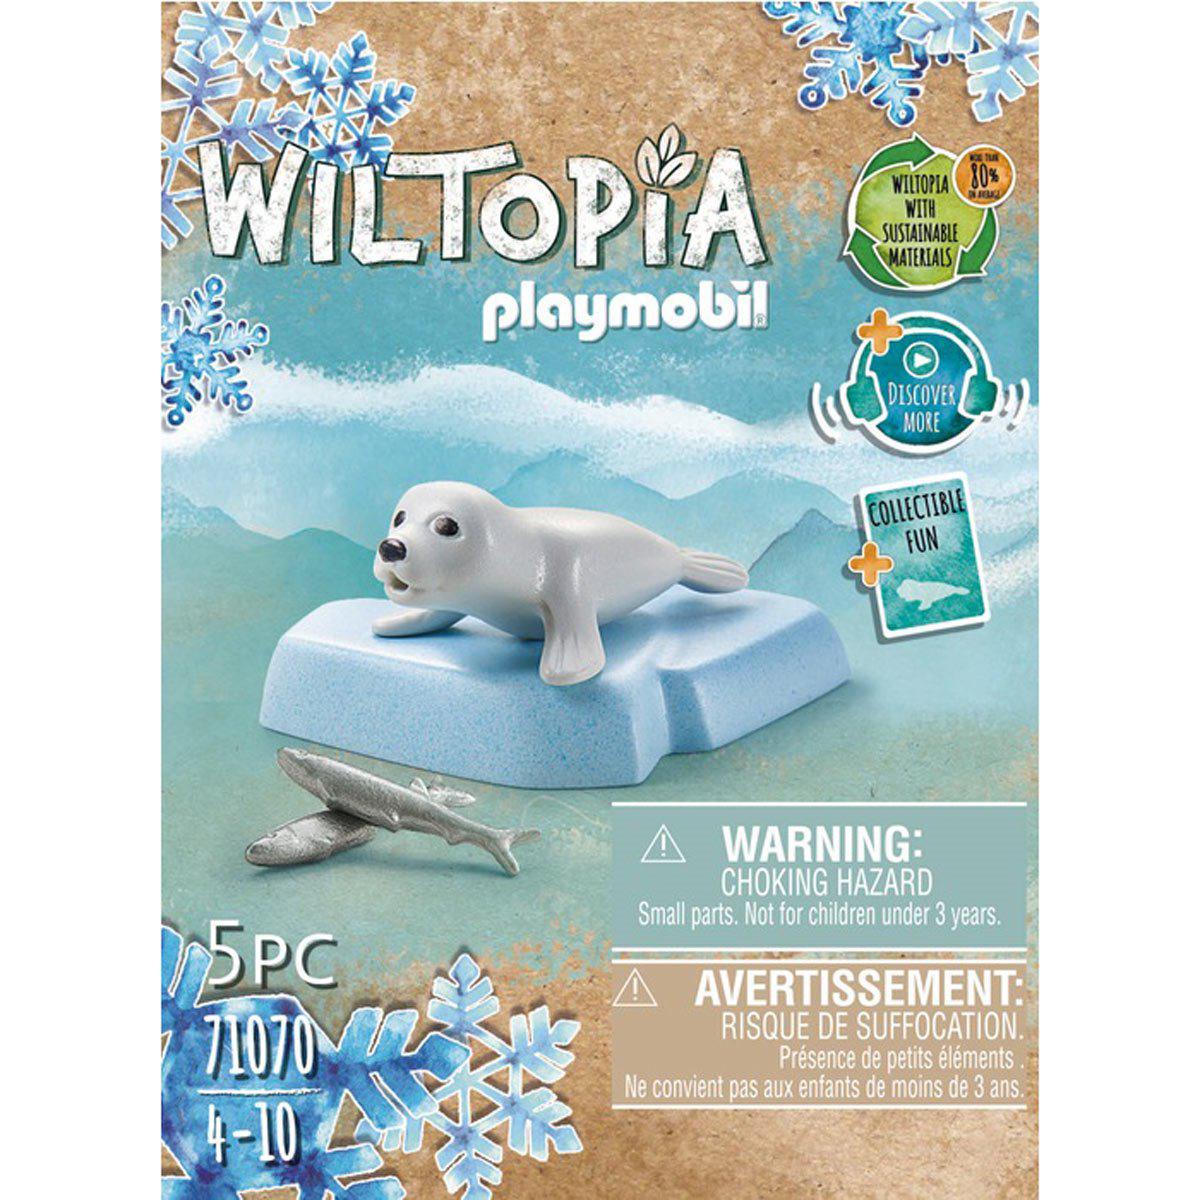 Playmobil-Wiltopia - Young Seal-71070-Legacy Toys